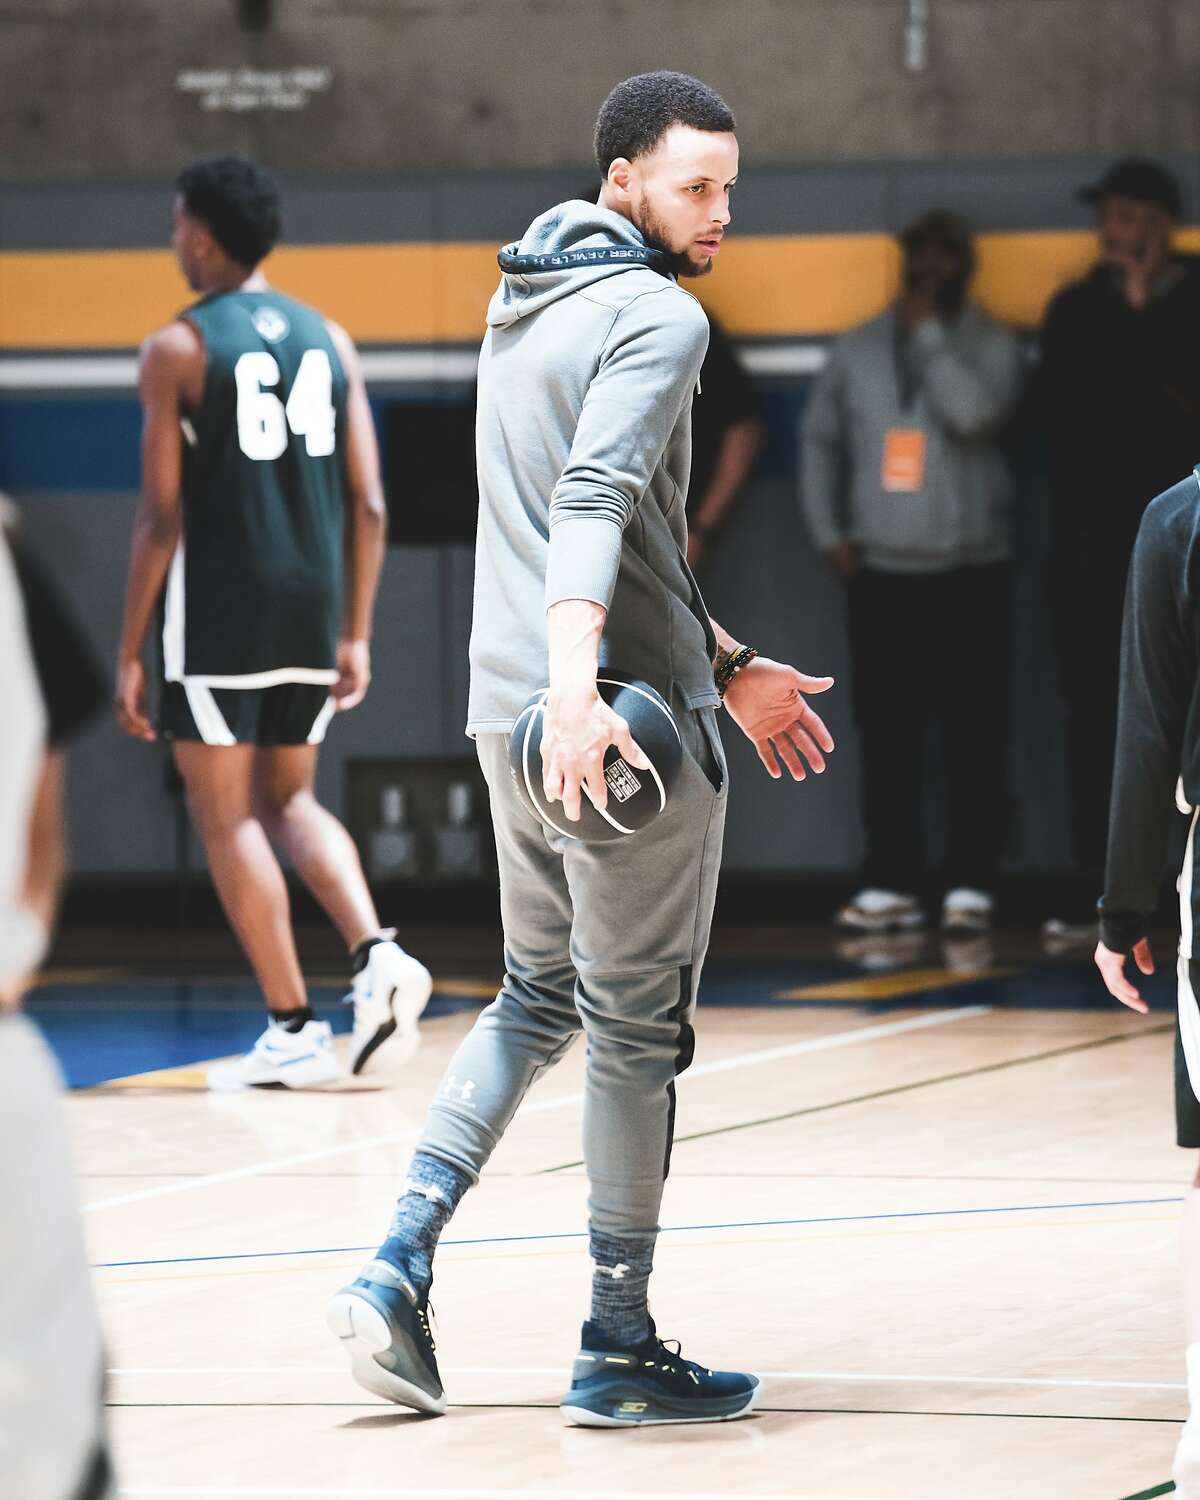 Stephen Curry coaches drills at the Underrated Tour's Oakland stop in April.